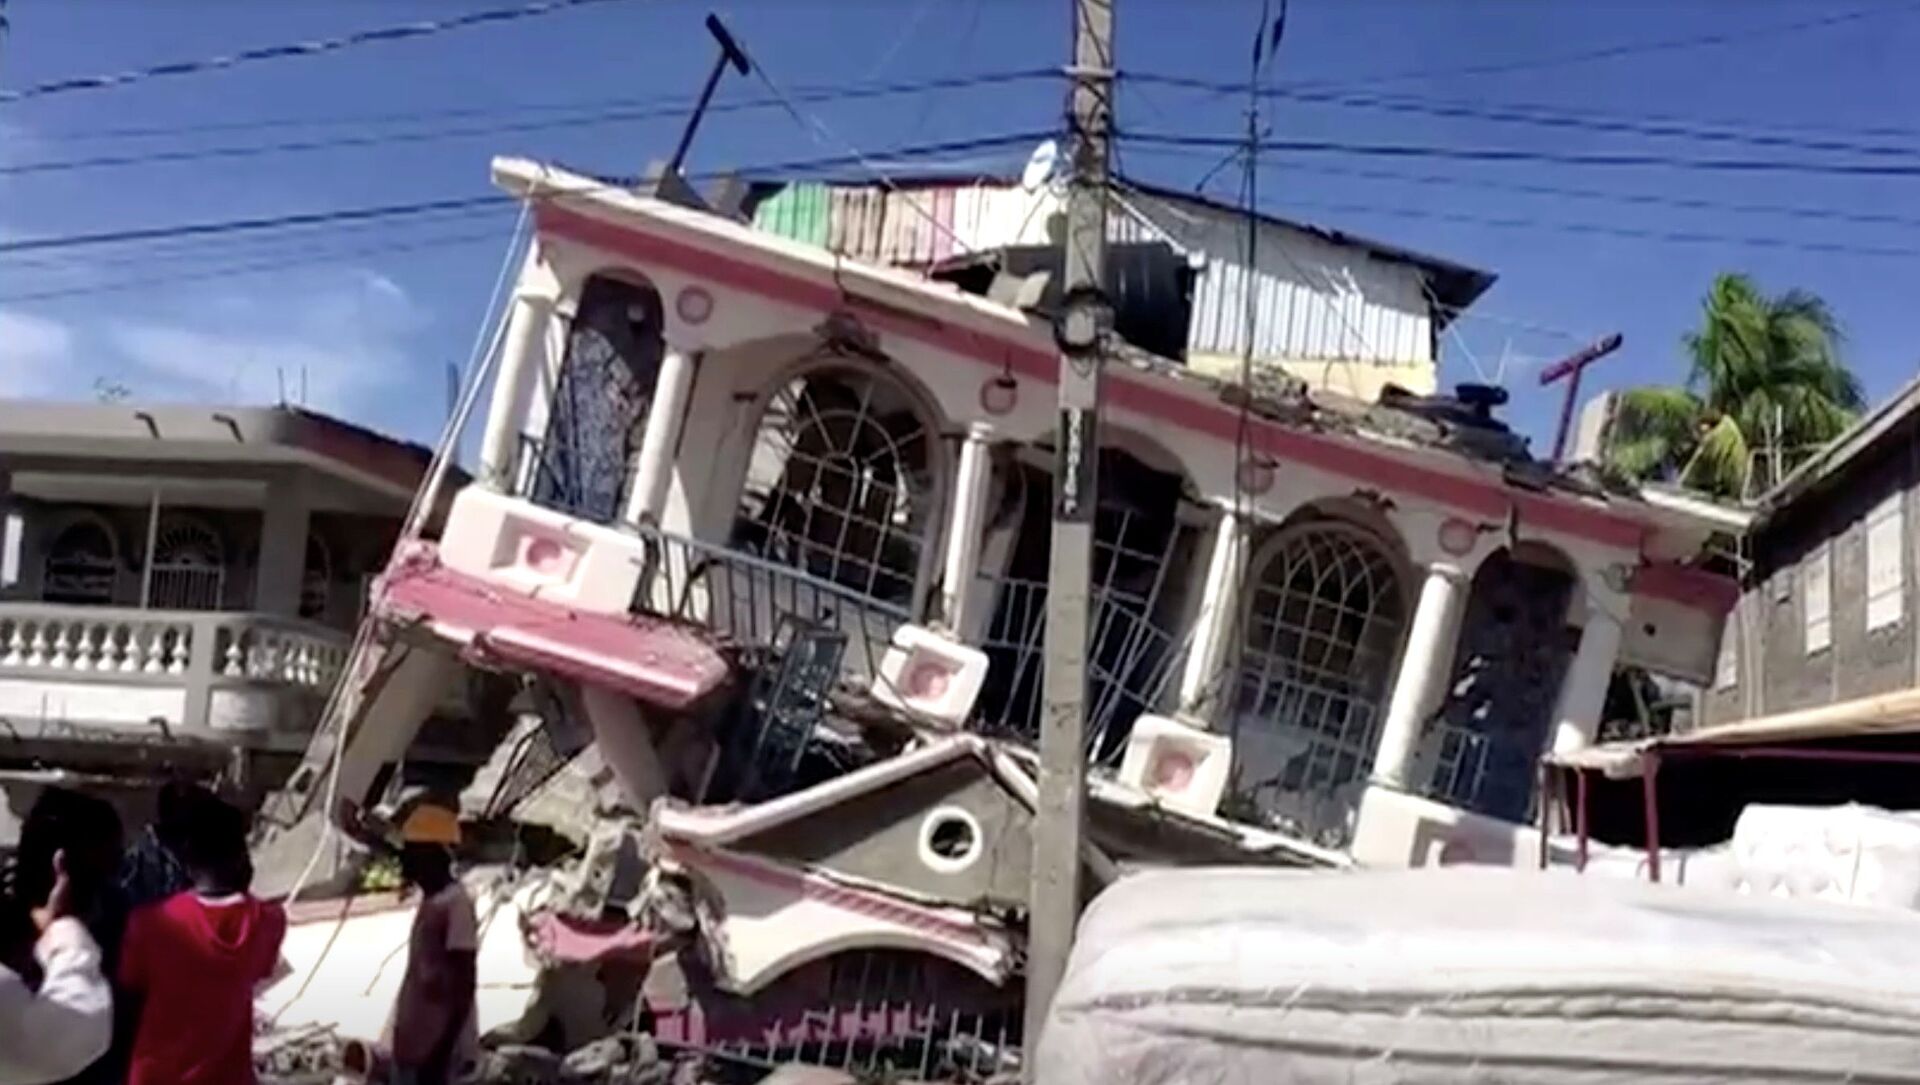 A view of a collapsed building following an earthquake, in Les Cayes, Haiti, in this still image taken from a video obtained by Reuters on August 14, 2021 - Sputnik International, 1920, 14.08.2021